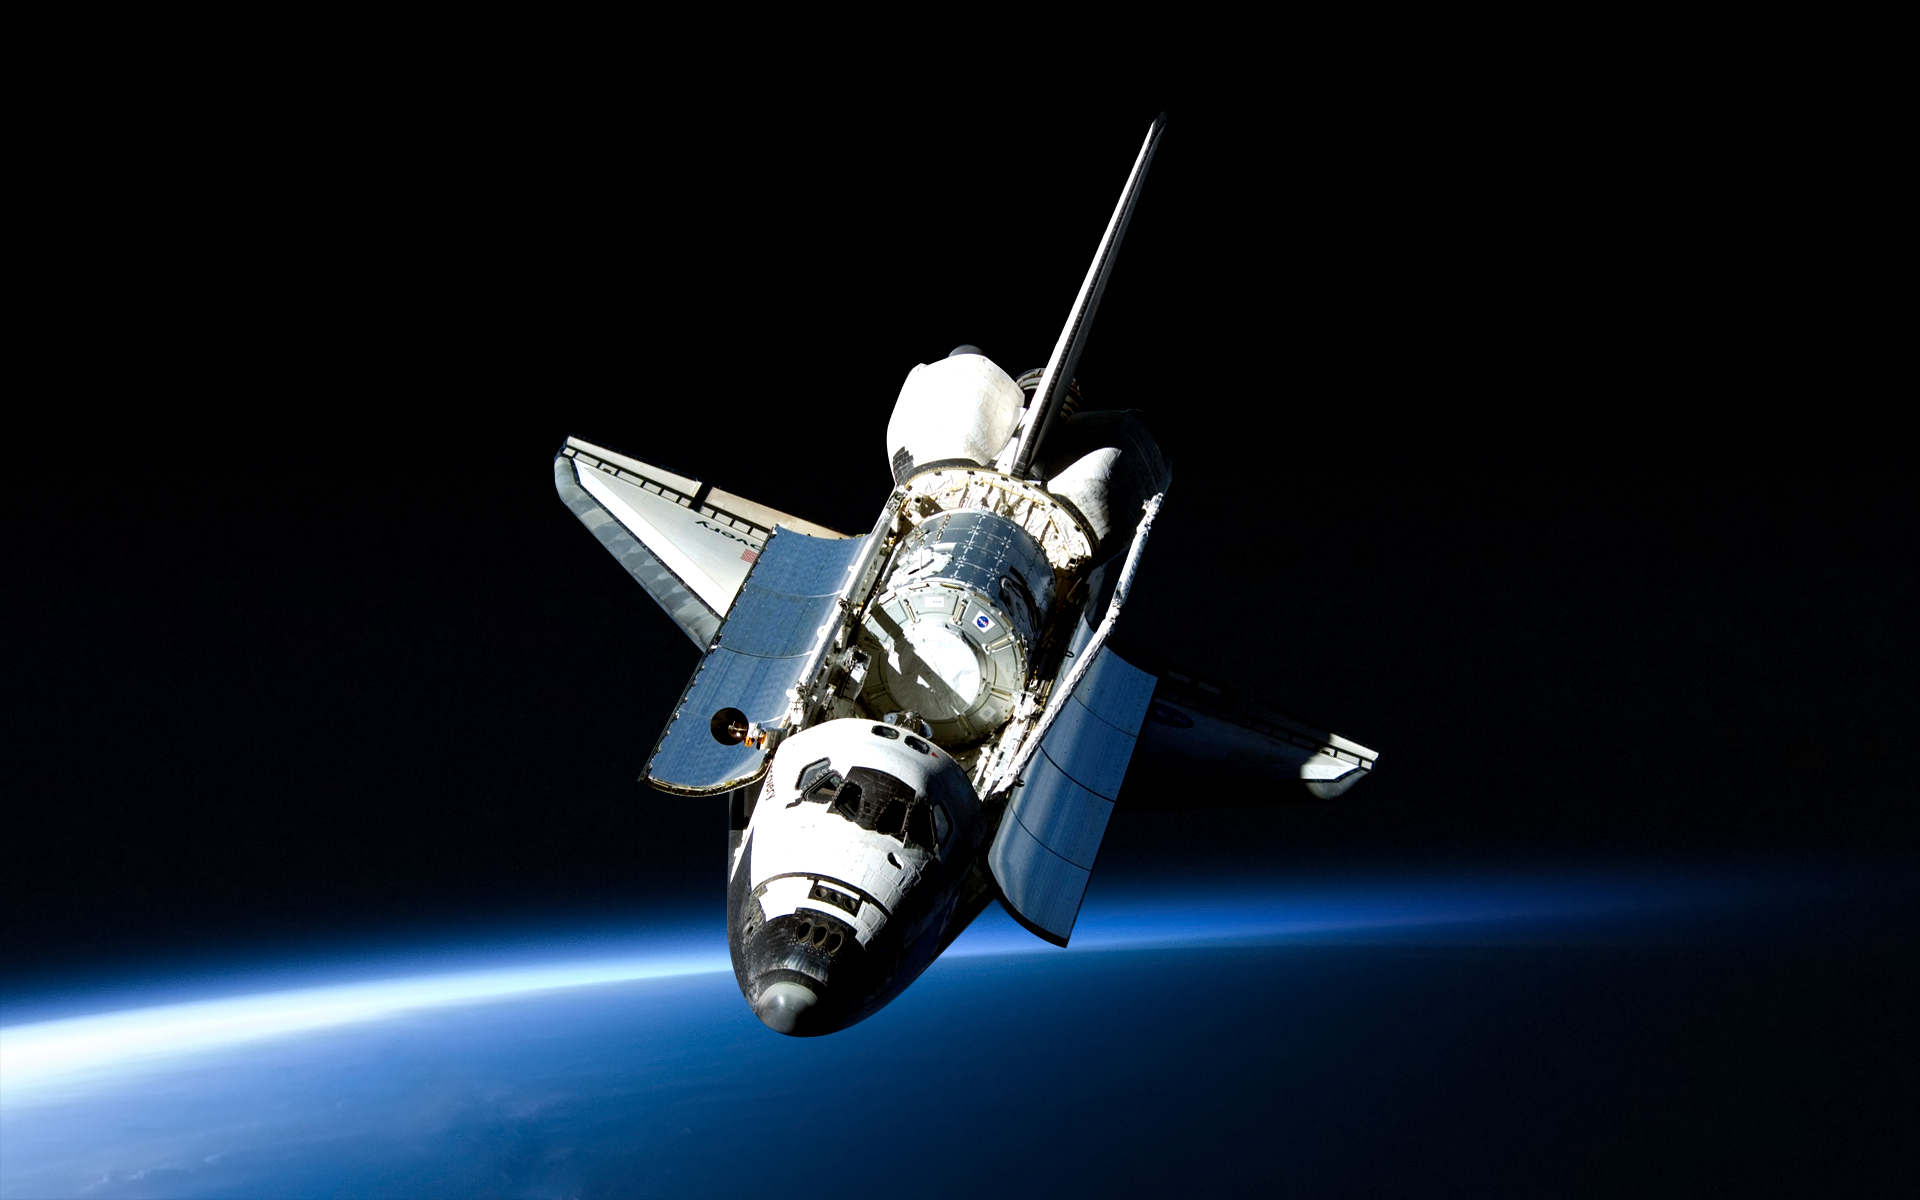 discovery wallpaper,space shuttle,spacecraft,outer space,vehicle,satellite